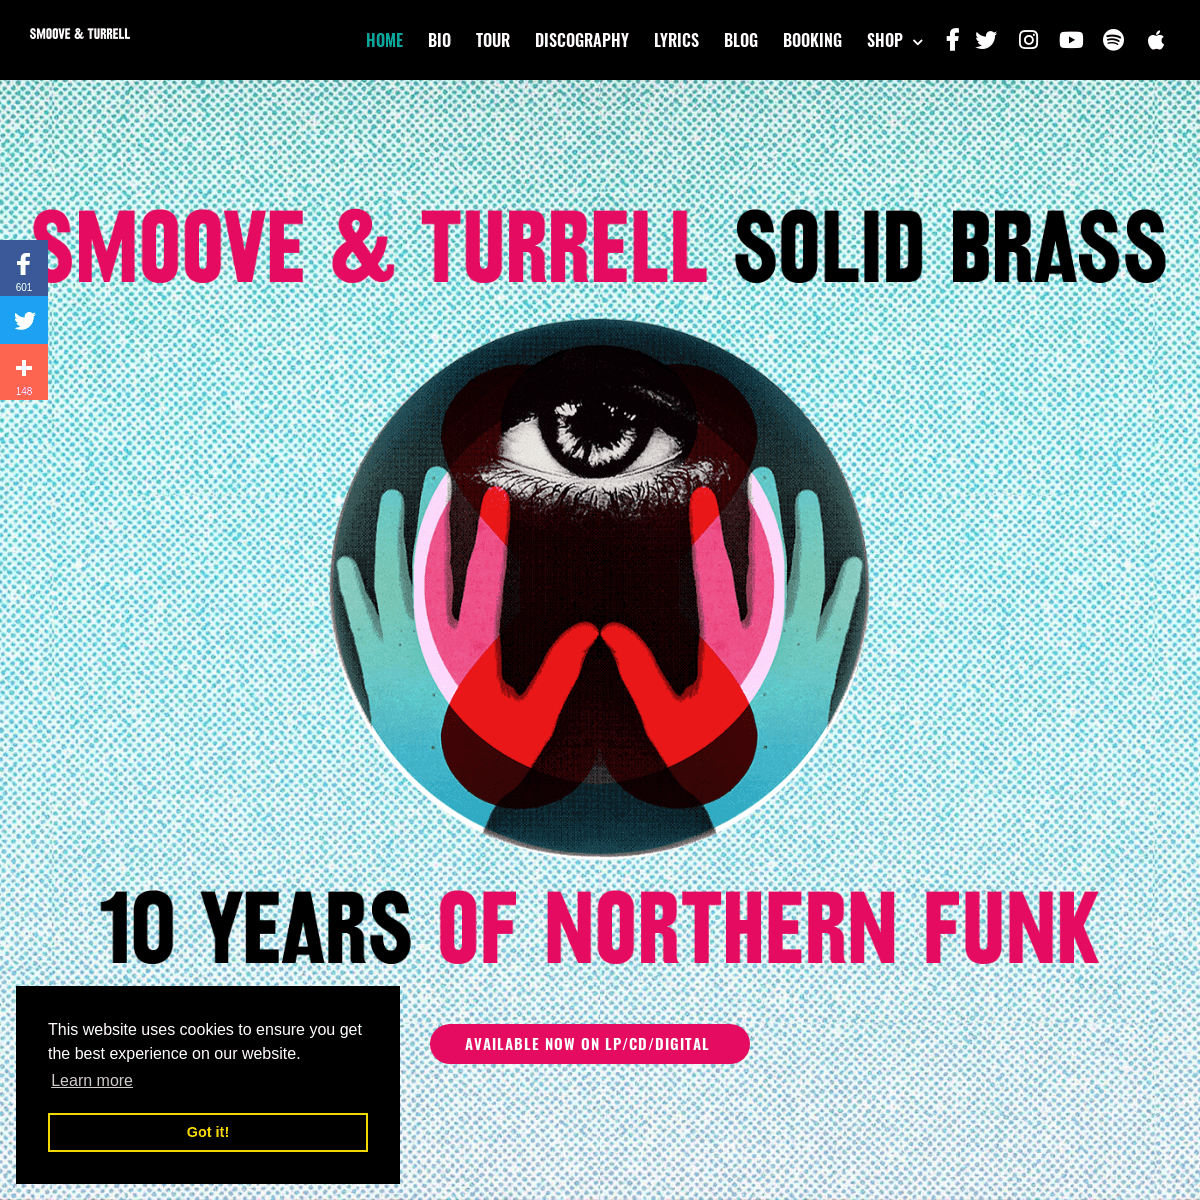 Smoove & Turrell - Official Website - Tour Dates & Discography